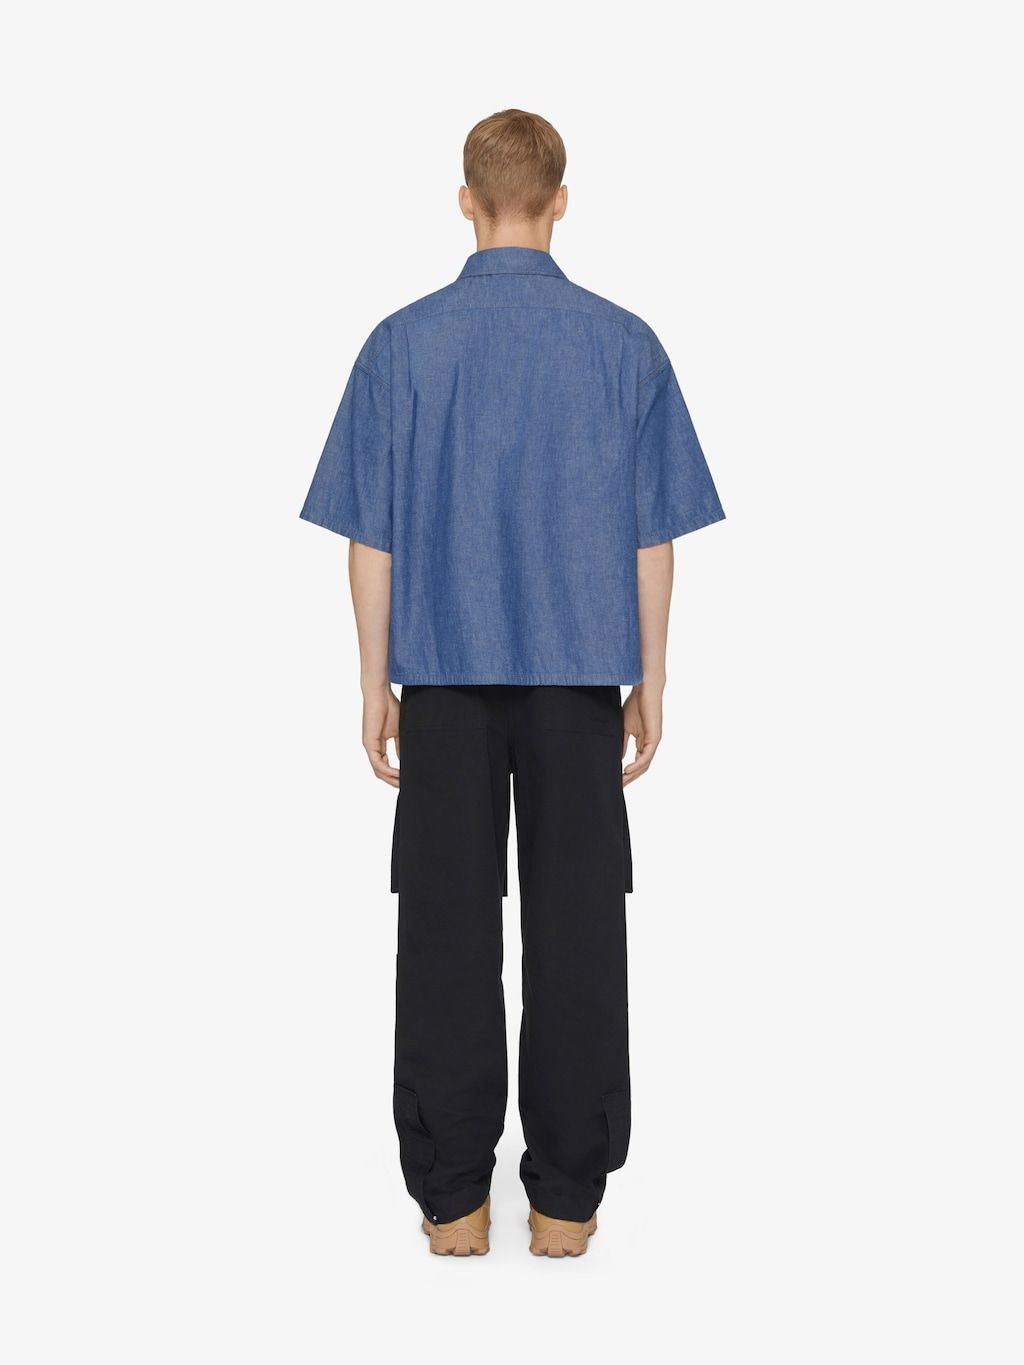 GIVENCHY TROUSERS